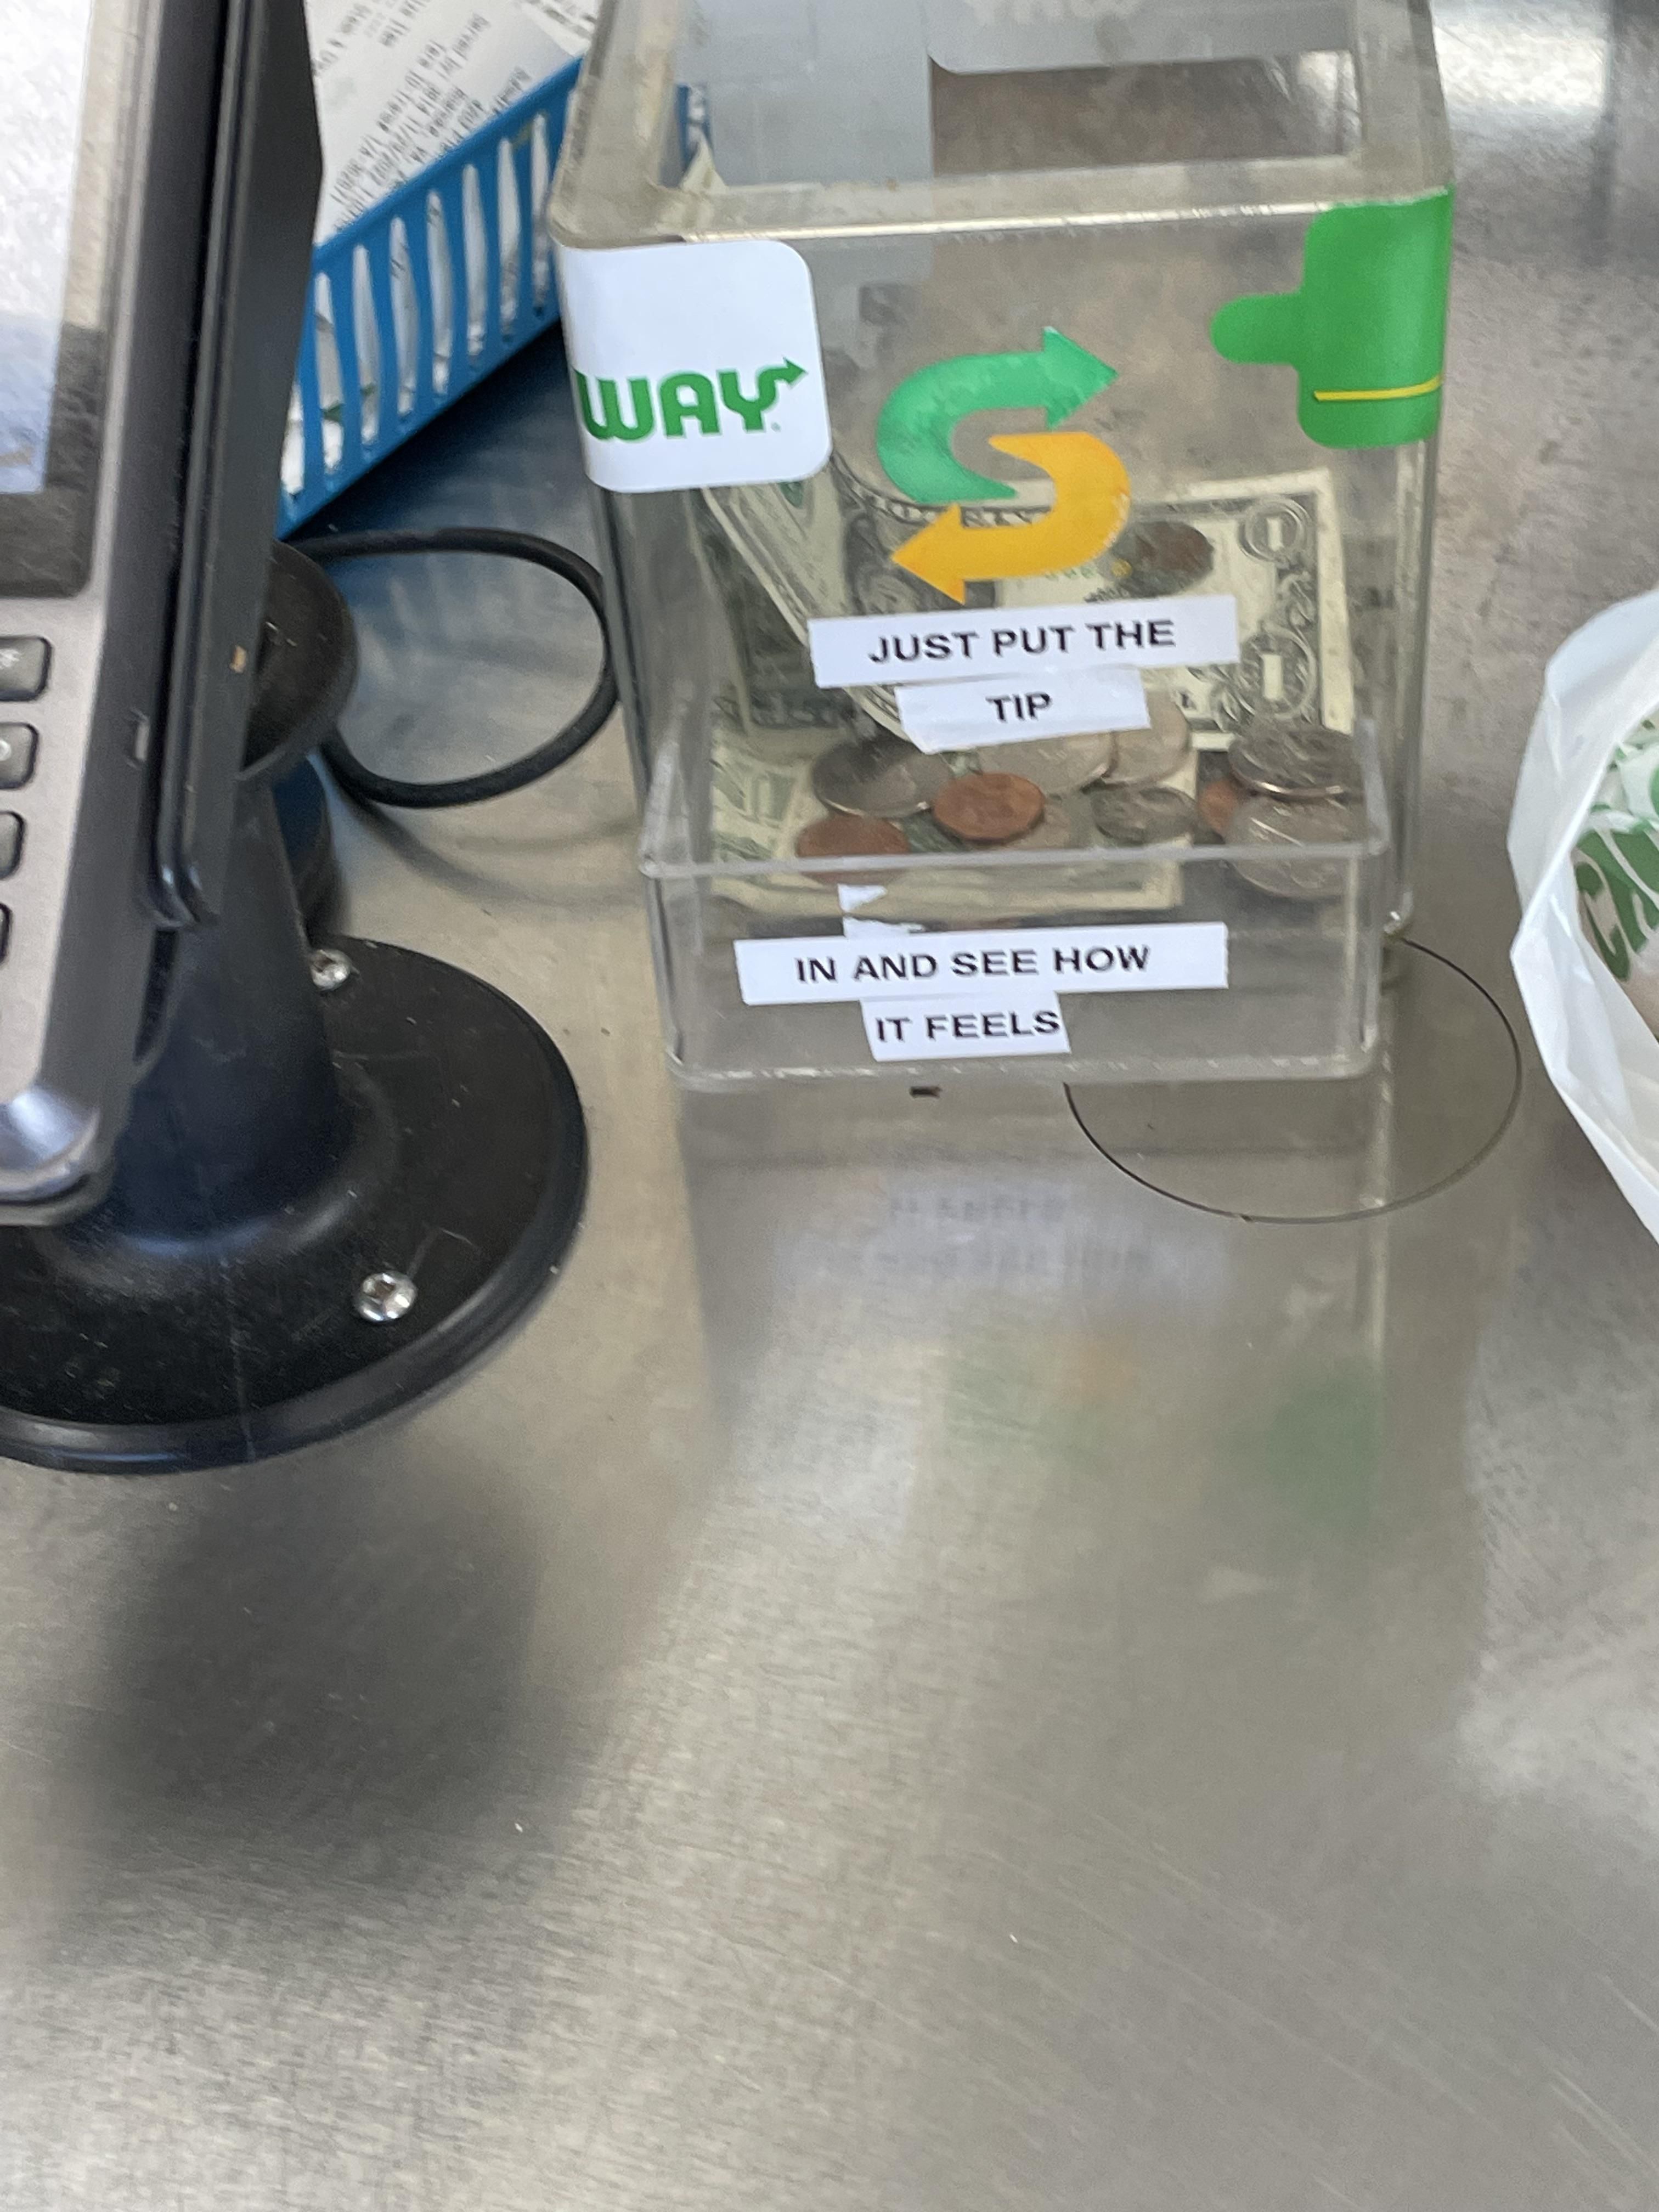 Subway’s interesting way of getting more tips